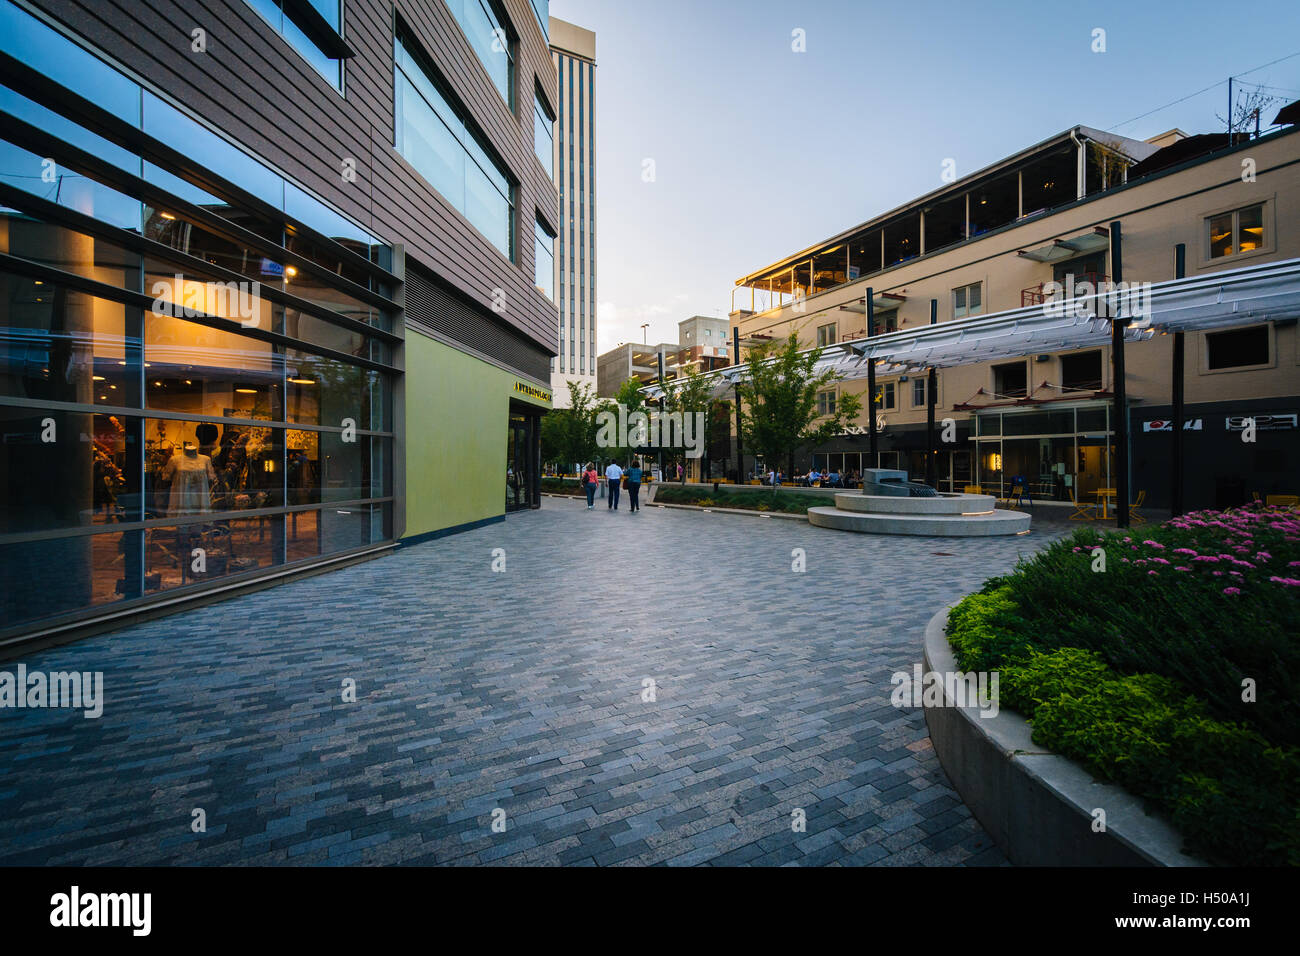 Pedestrian plaza and buildings in downtown Greenville, South Carolina. Stock Photo